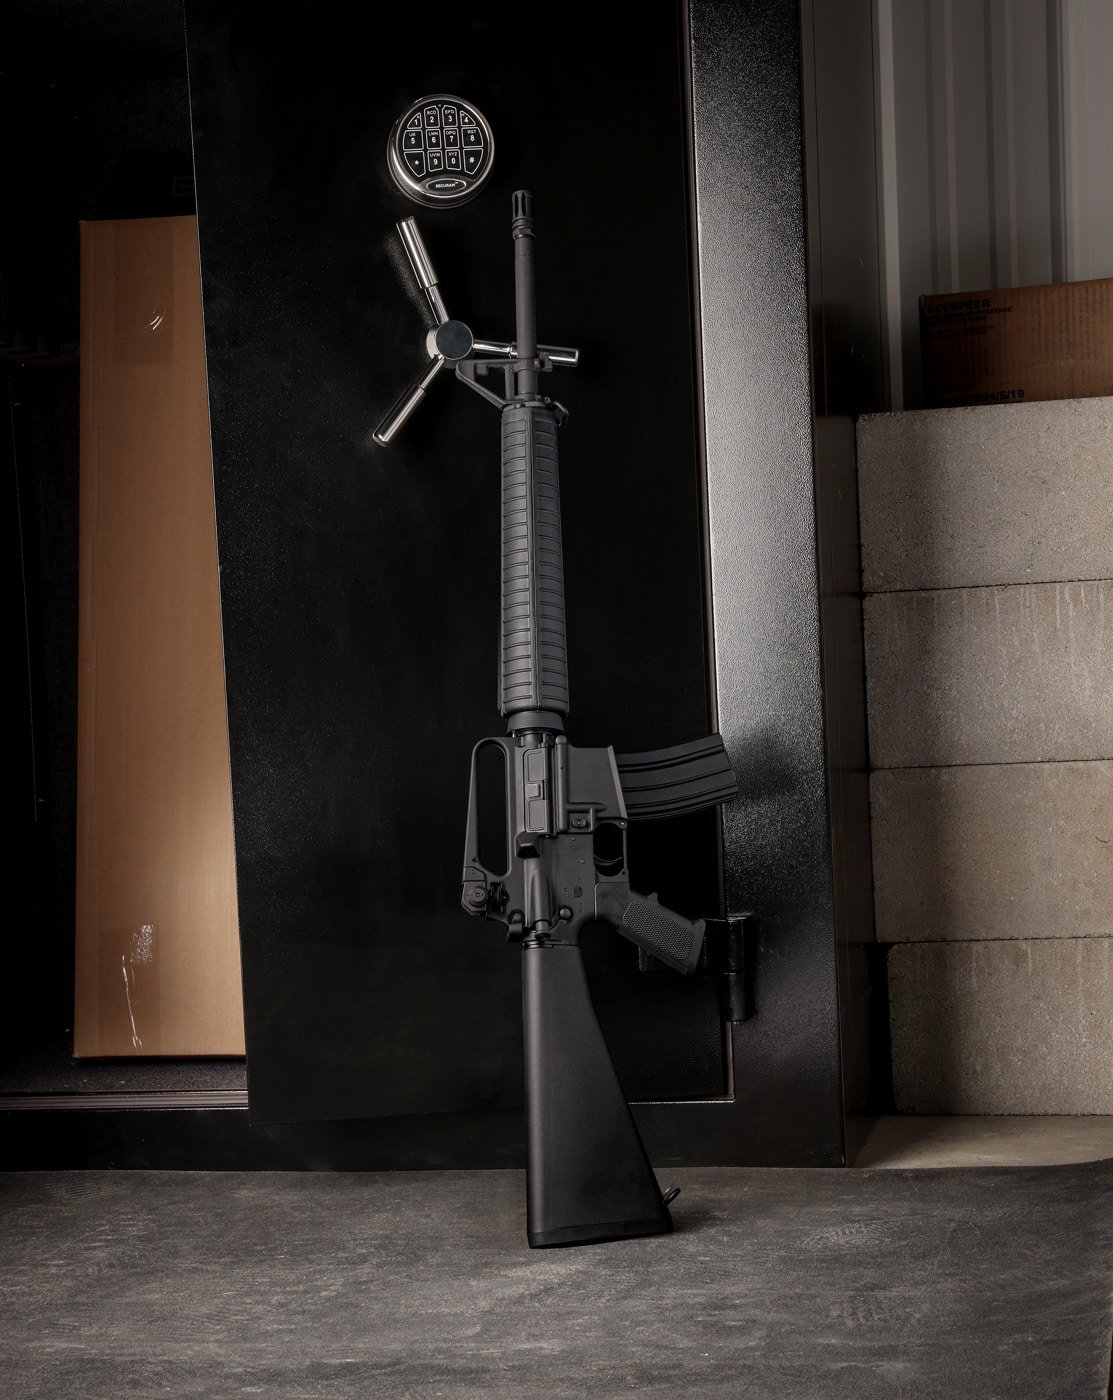 In this digital photo, we see a Springfield SA-16A2 rifle leaning against a gun safe.